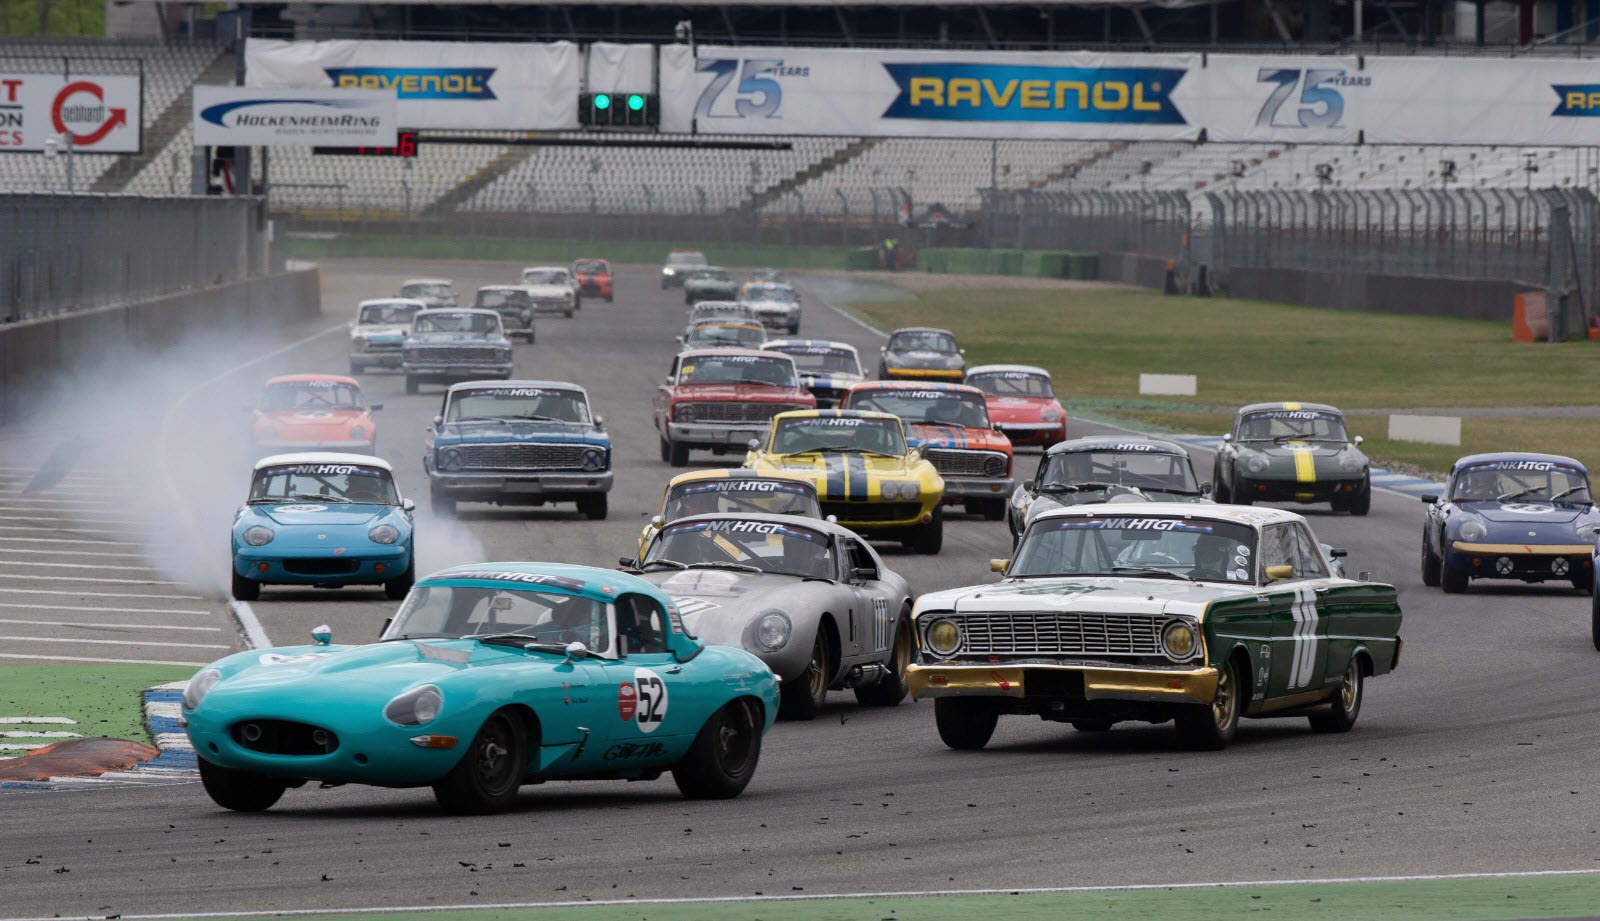 NKHTGT Hockenheim racing for historic touring cars and GTs